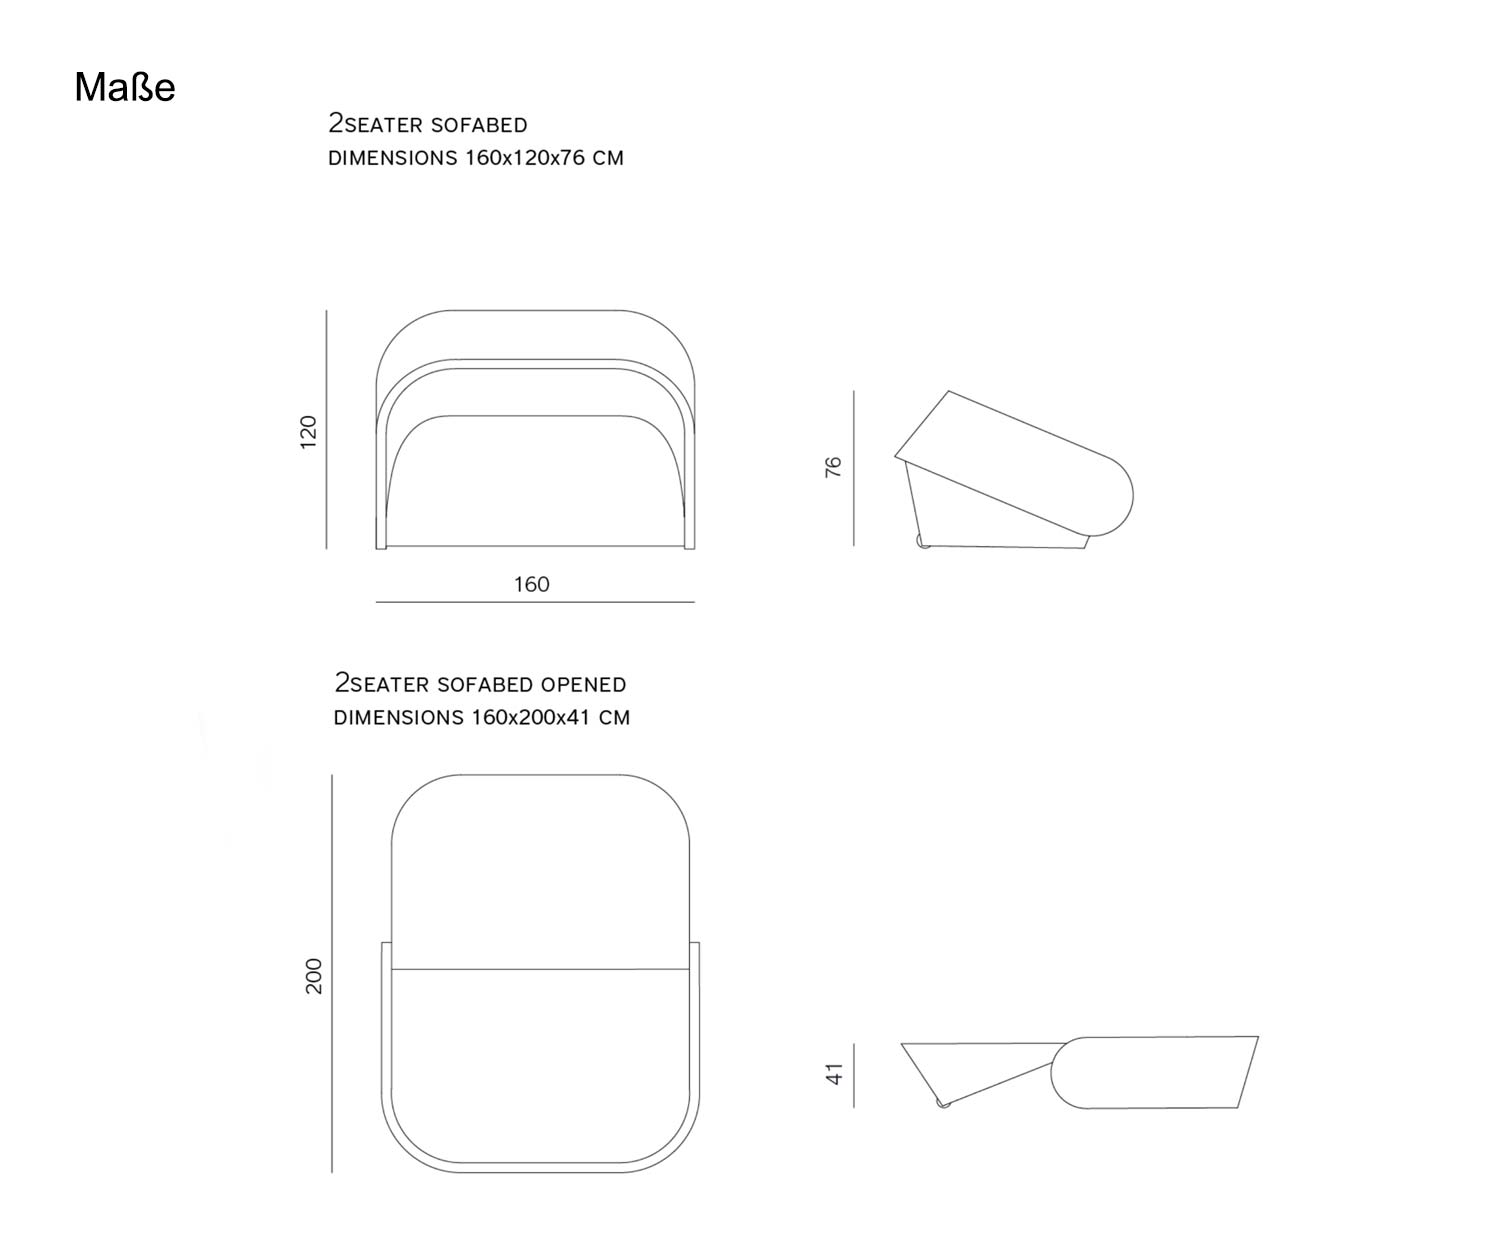 Prostoria Sofa bed Guest bed Dimensions Sketch Sizes Sizes